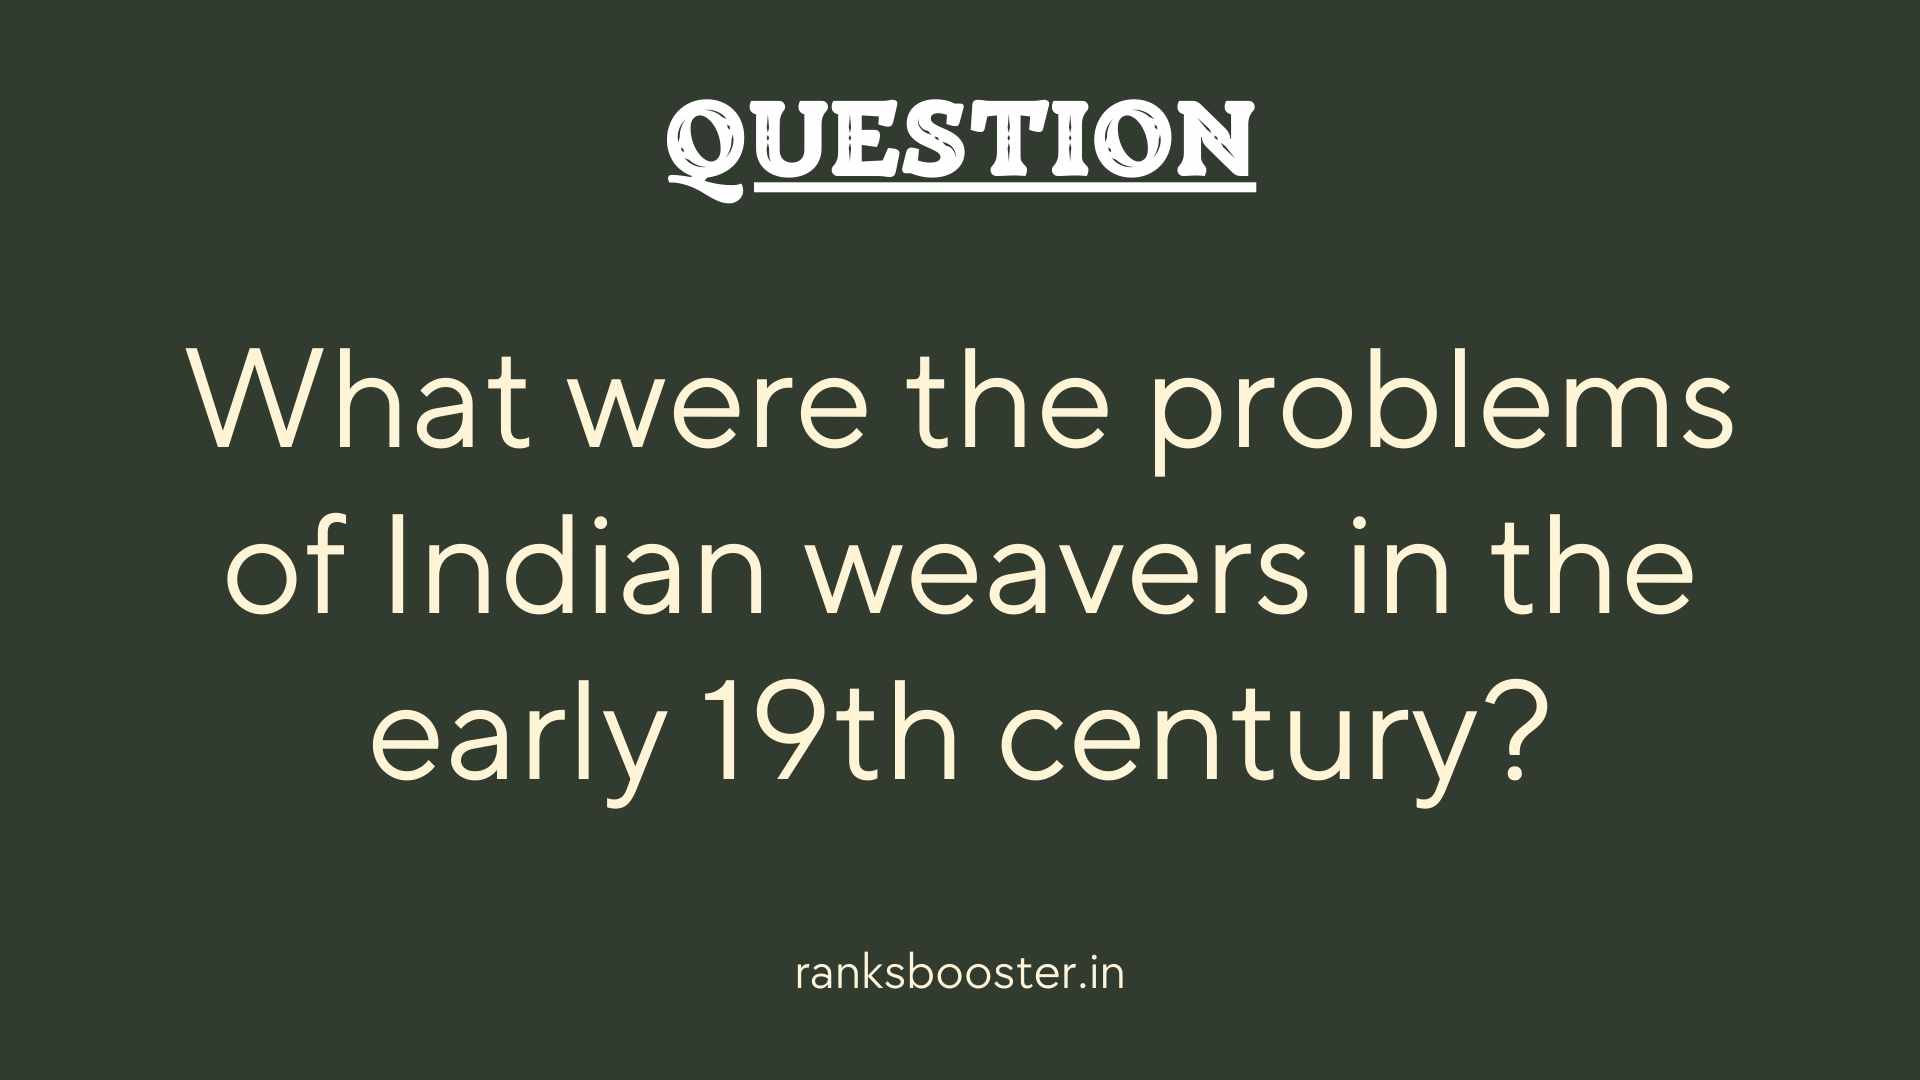 Question: What were the problems of Indian weavers in the early 19th century?